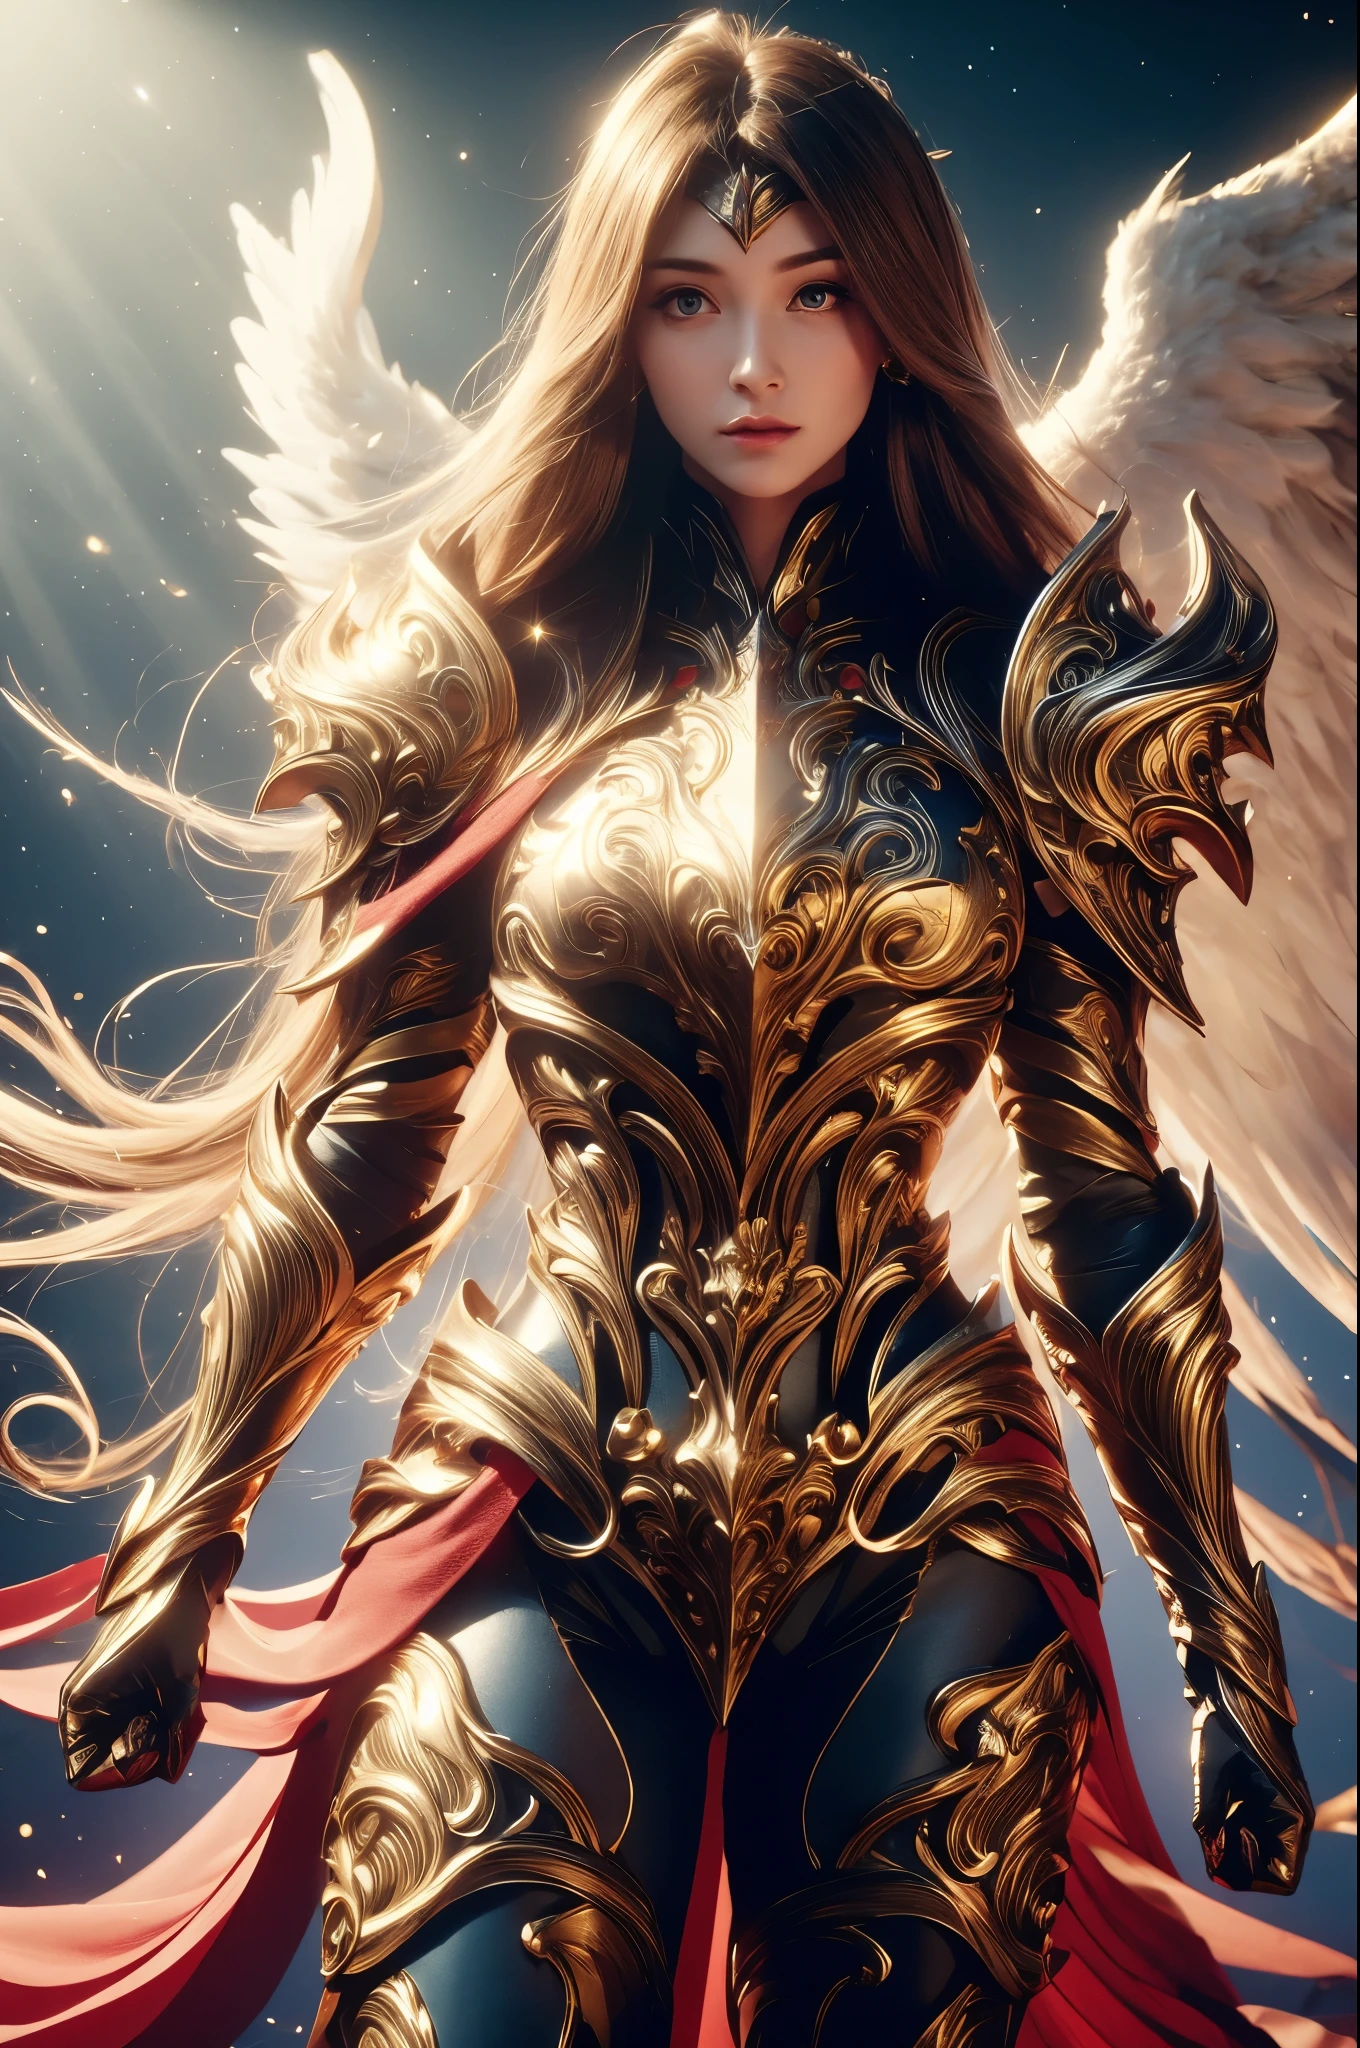 WINGED WOMAN, SAINT WOMAN, HUGE LONG HAIR, BROWN HAIR, HUGE BROWN FEATHERS, GOLD BODY ARMOUR, LONG BLUE BODYSUIT, PALE SKIN, BLUE EYES, LIGHTING EYES, ROSY CHEEKS, MENTAL FORAMEN, ATHLETIC BODY, LUMINOUS BODY AURA, MUSCLES, LIGHTING AURA, GOLD BRACELETS, GOLD GAUNTLETS, BACKLIGHTS, SUN, RIVER, SAINT WOMAN, SIDE BODY VIEW, ANGEL FROM HEAVEN